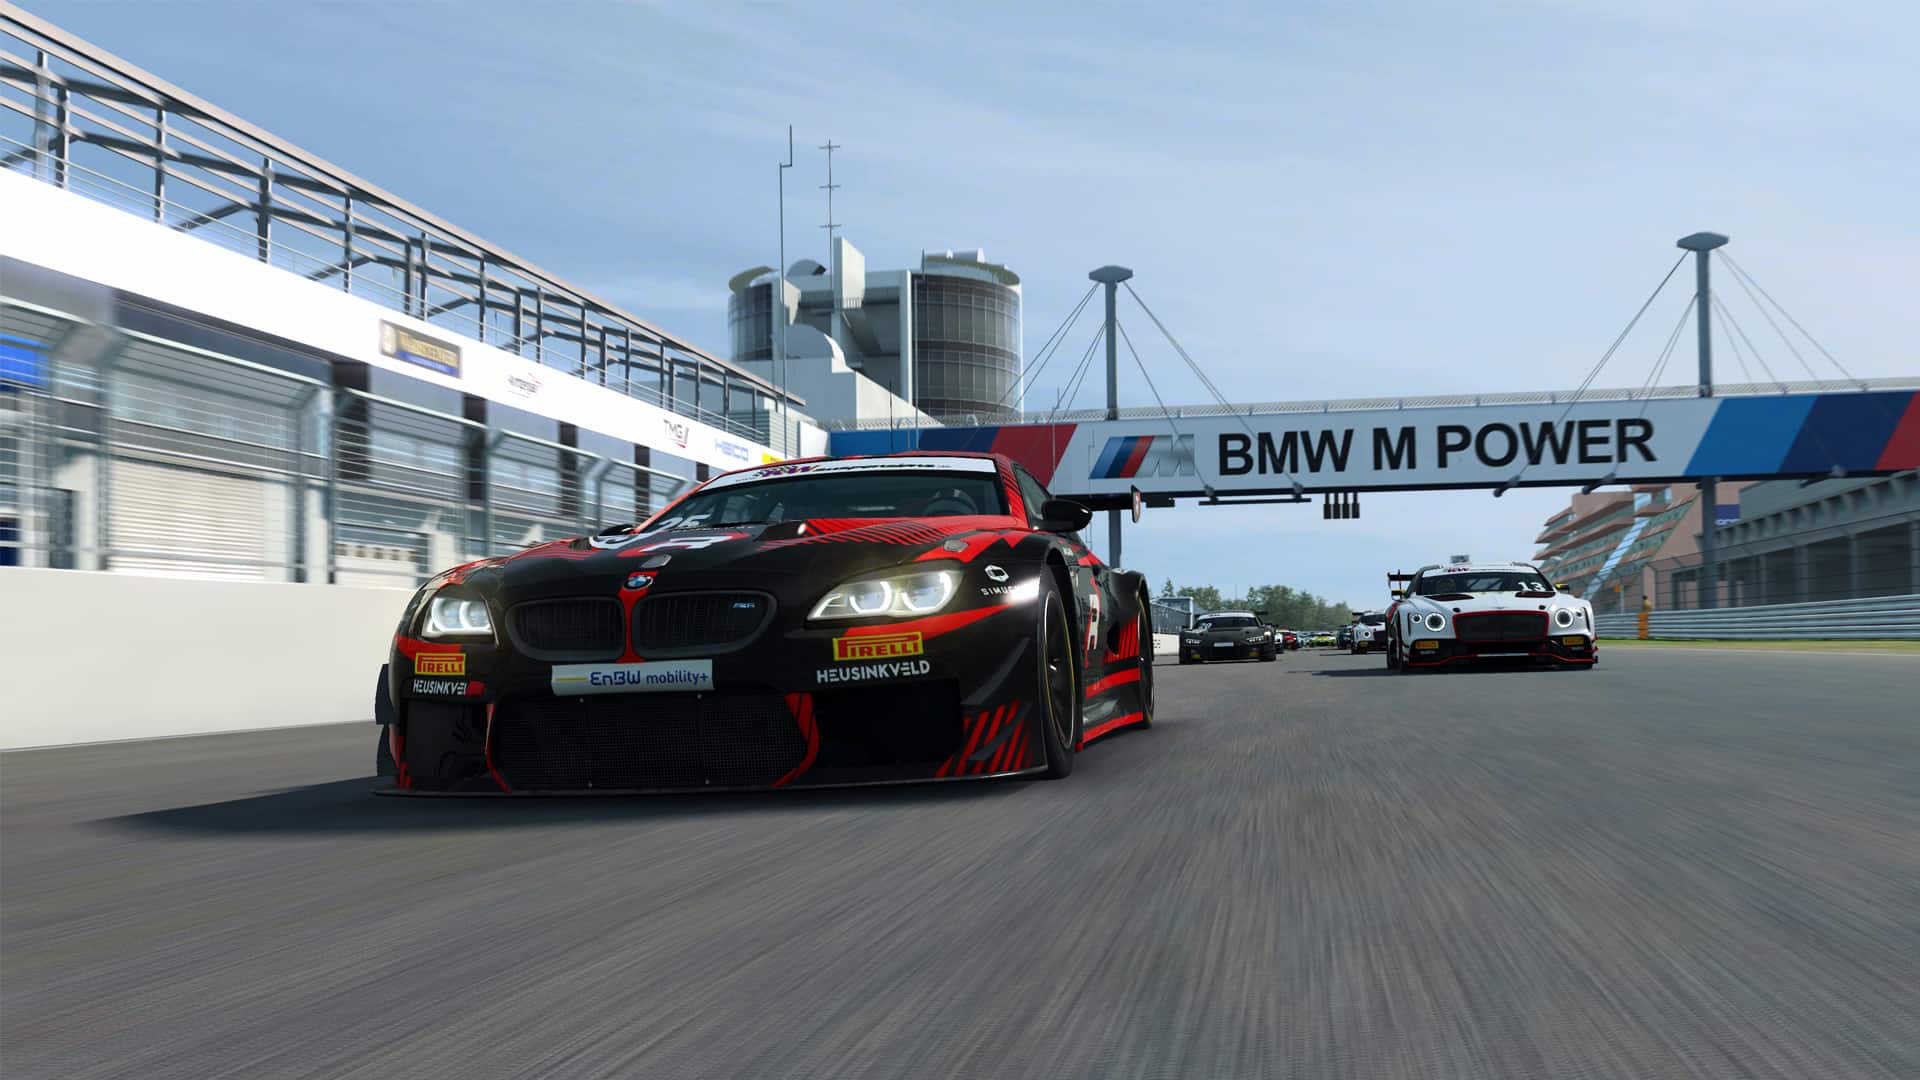 WATCH Round 4 of the 2021 ADAC GT Masters Esports Championship live Traxion